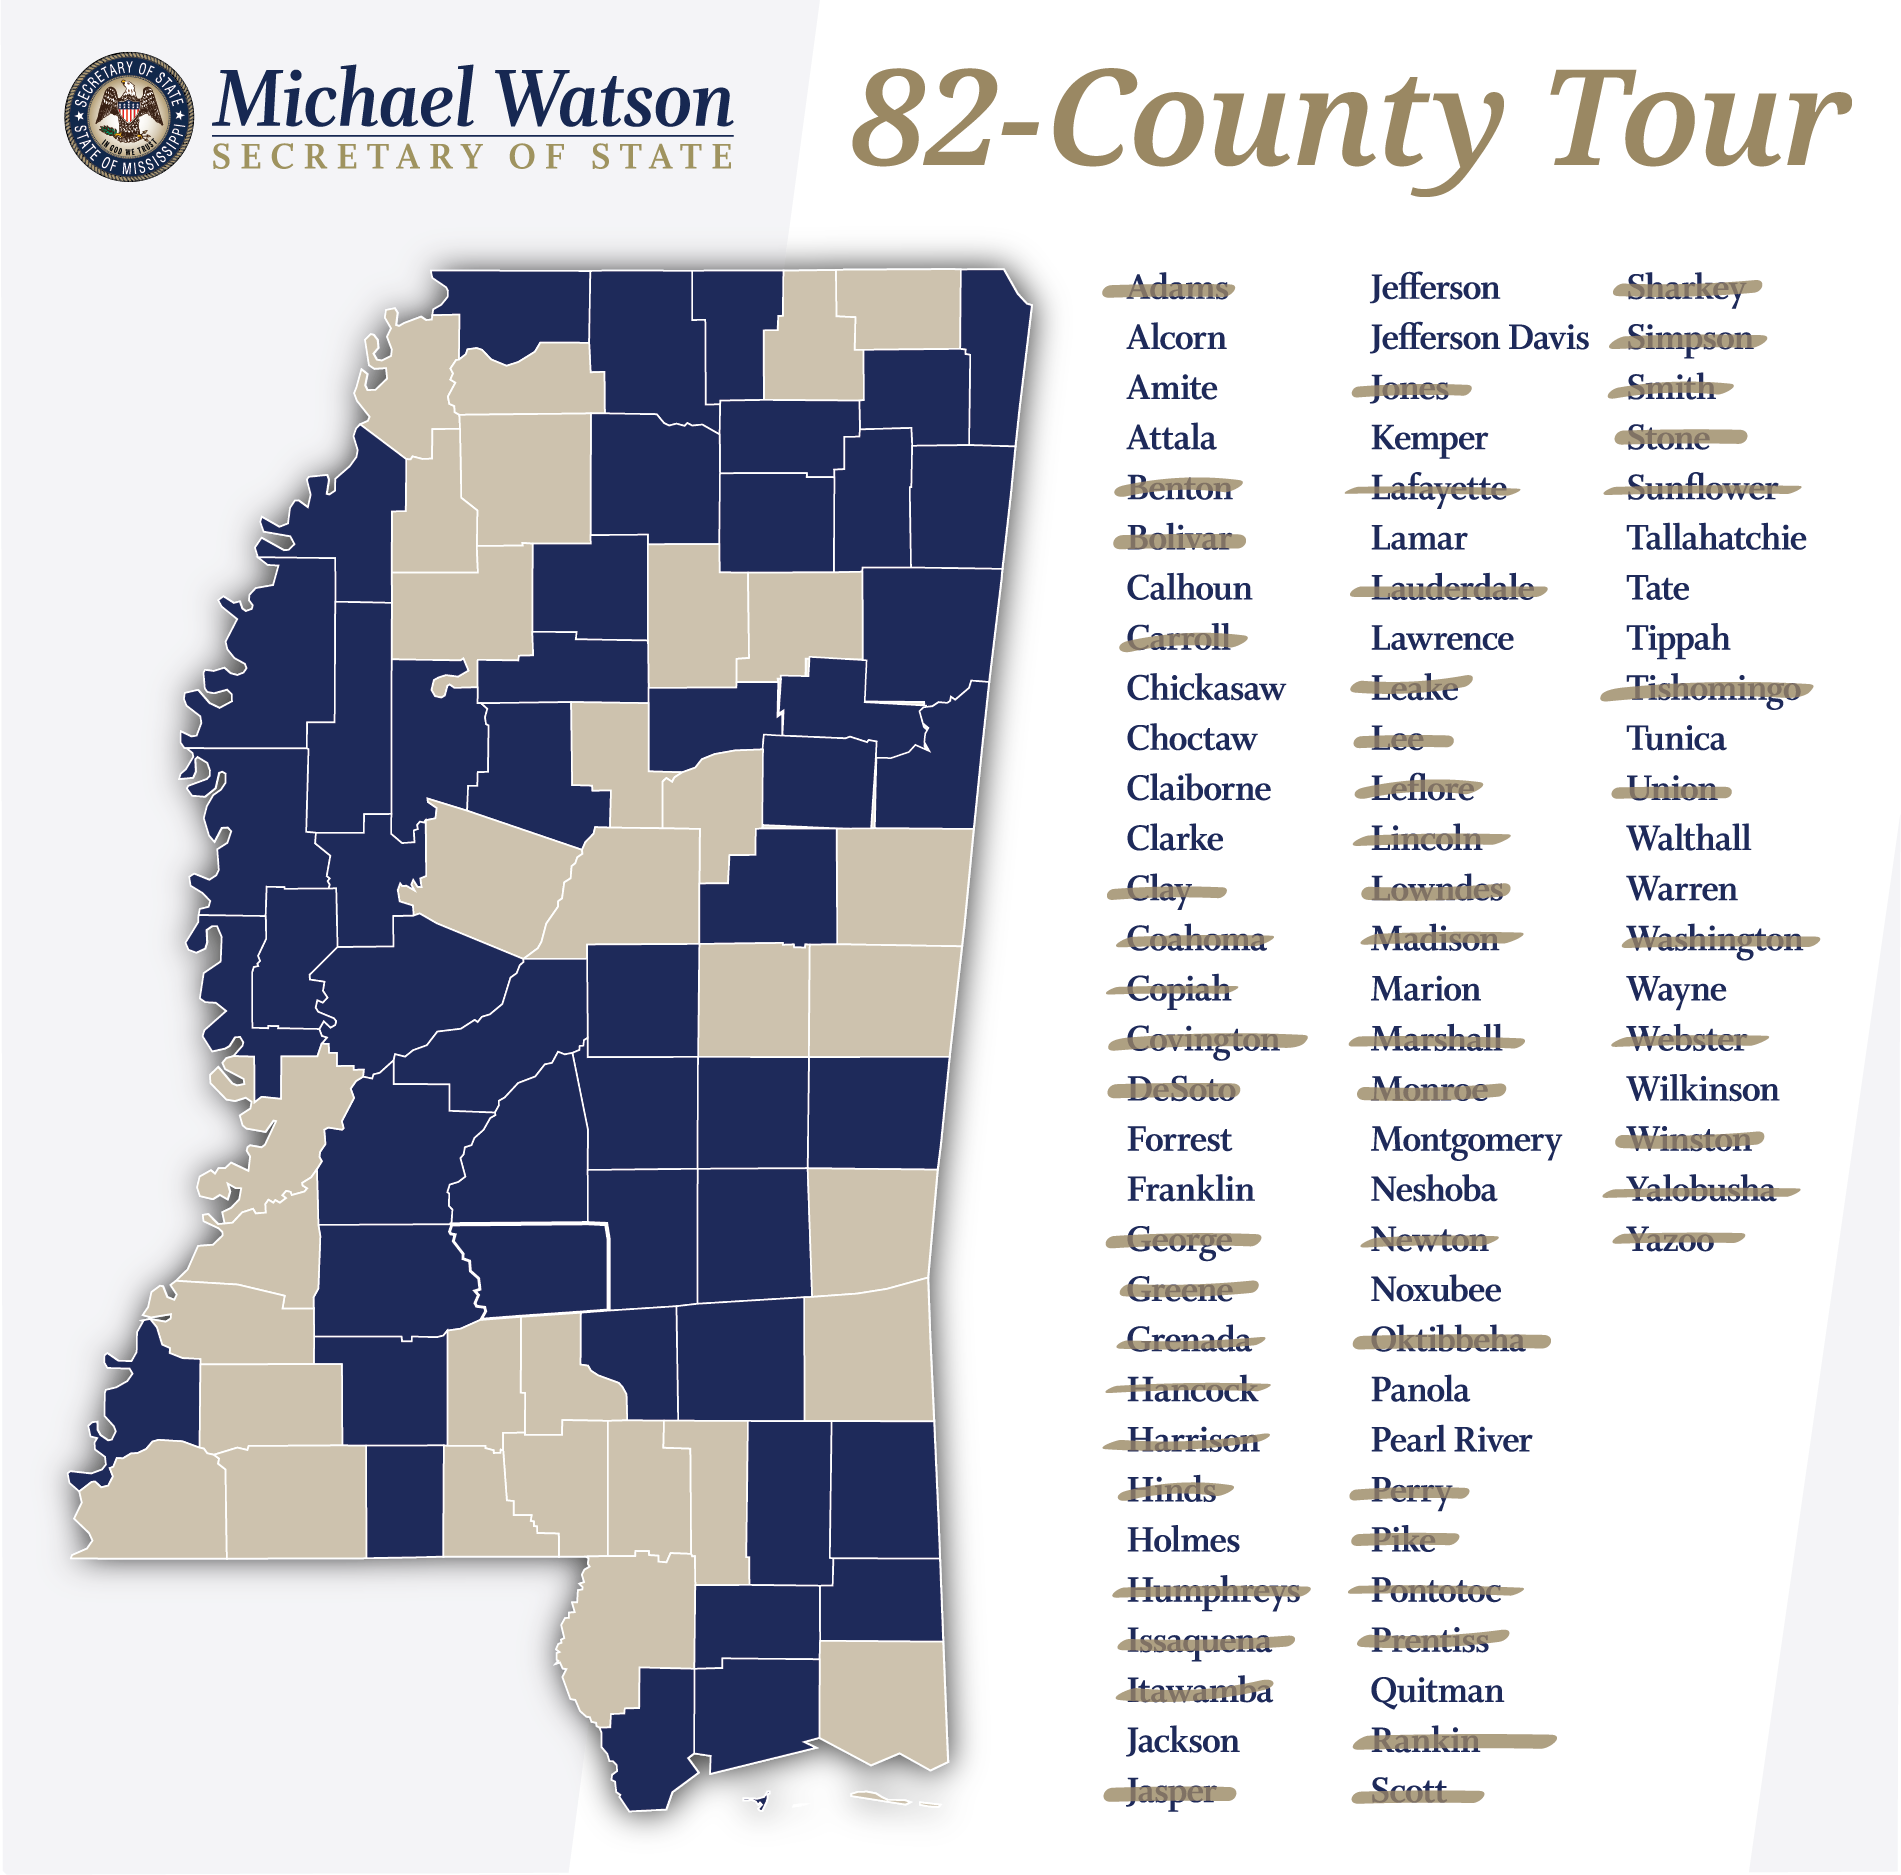 County Tour map